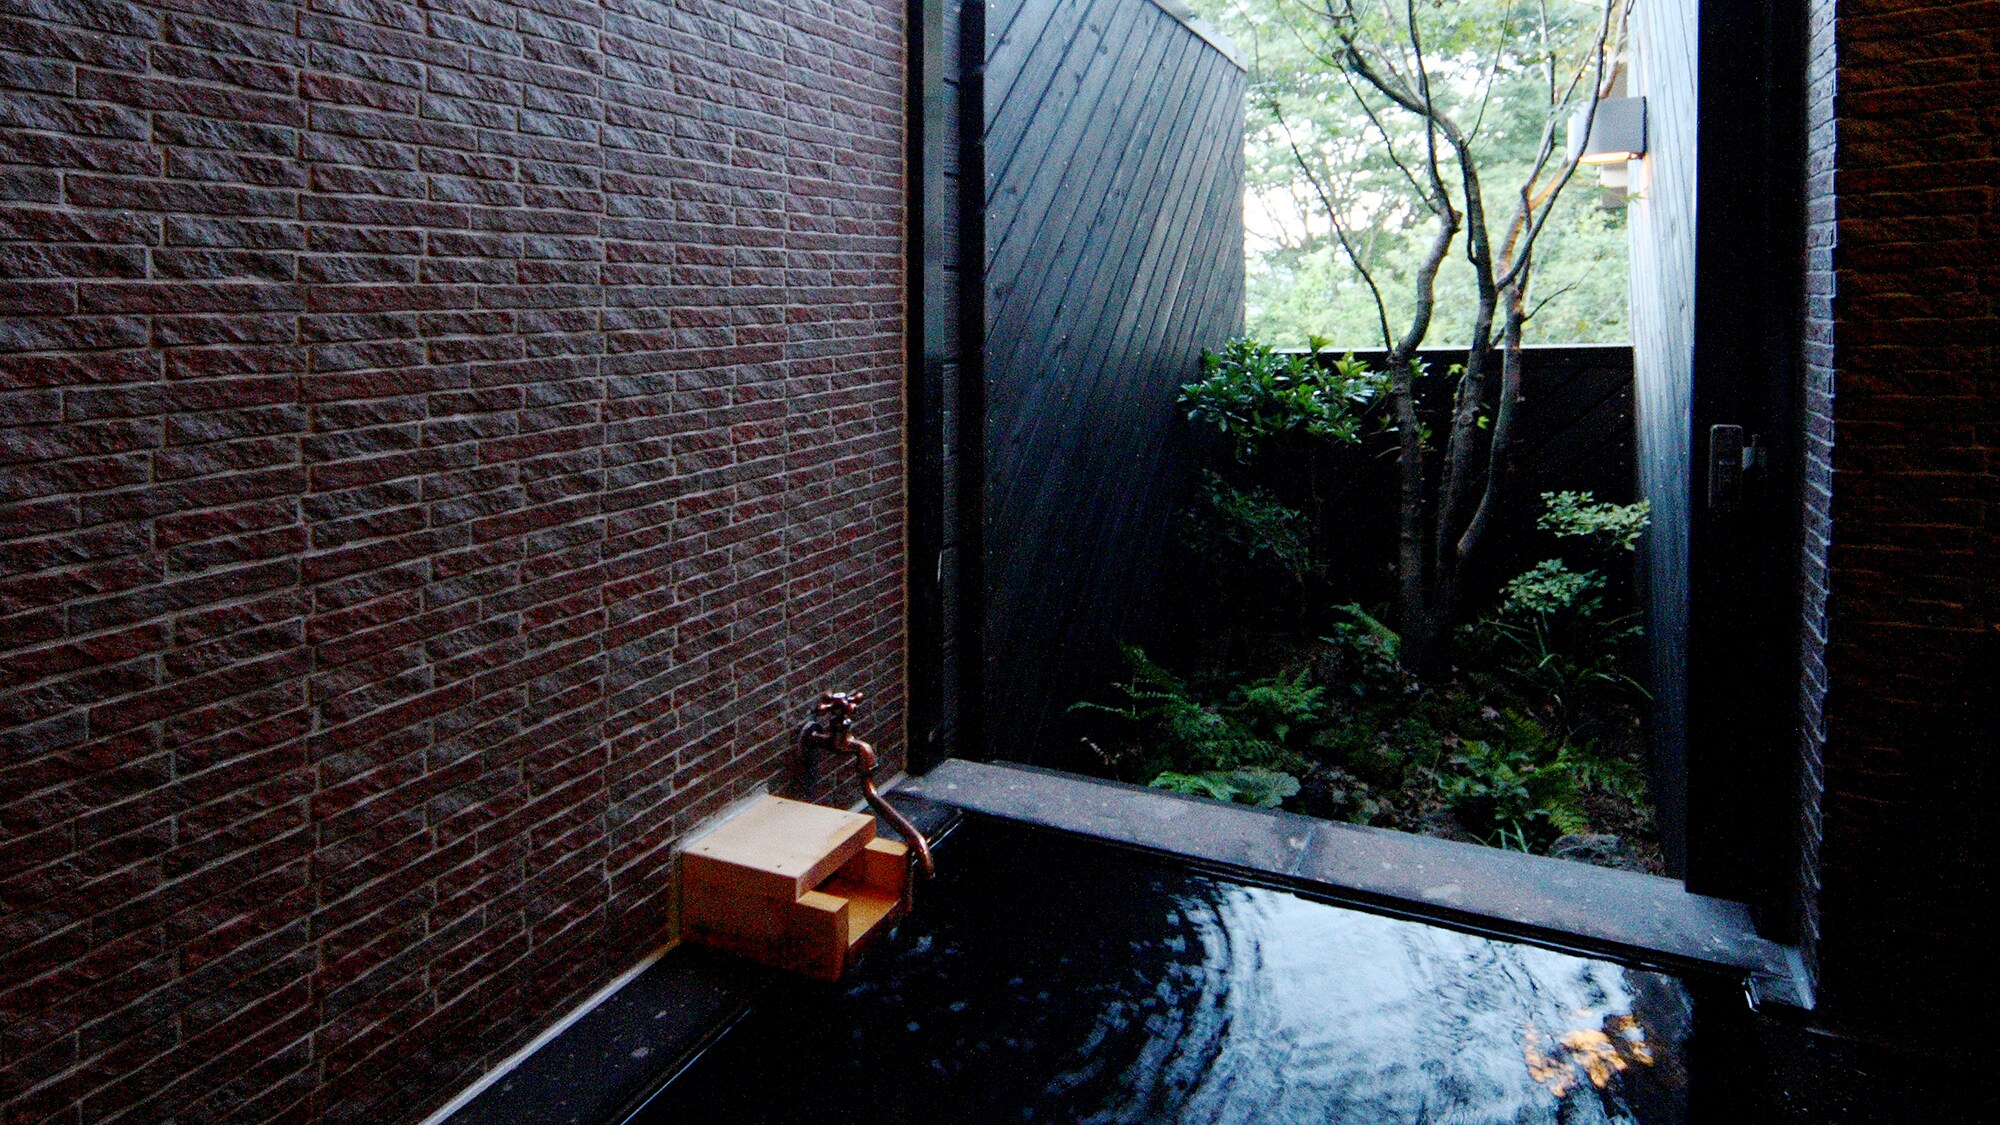 [Asian Resort-216-] ≪Flowing from the source _ Semi-open-air bath≫